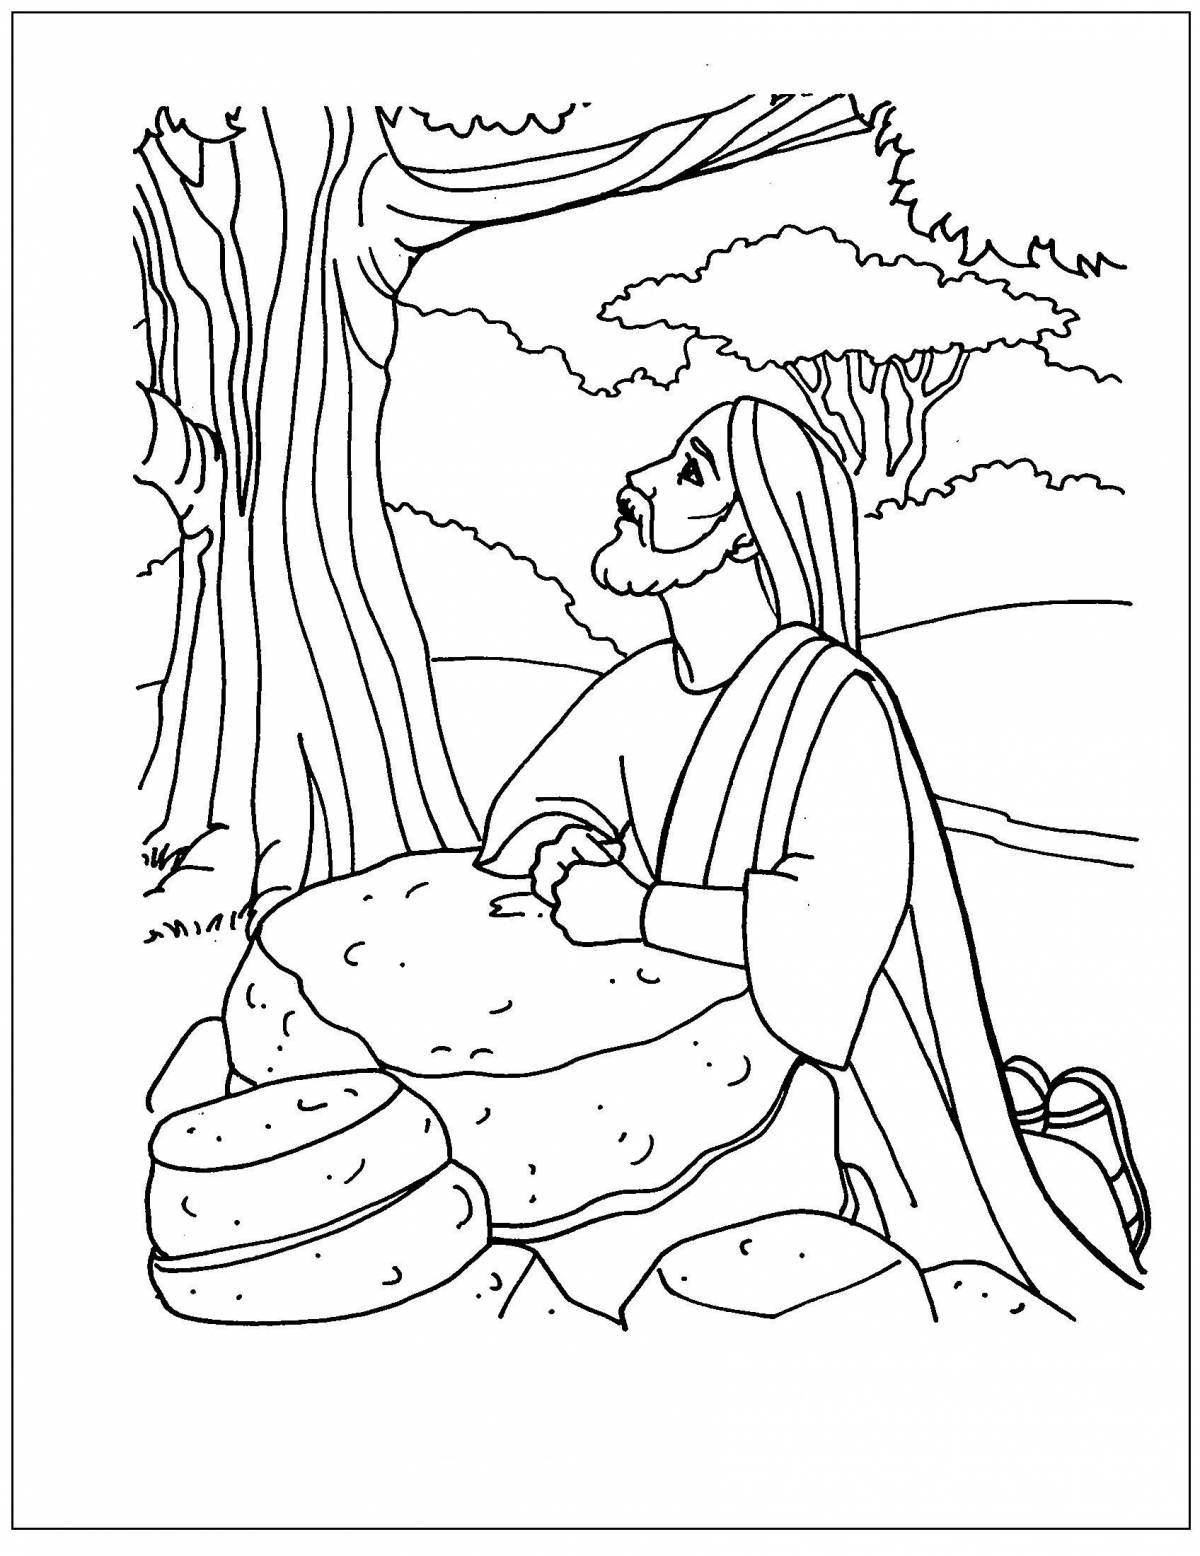 10 lepers animated coloring page